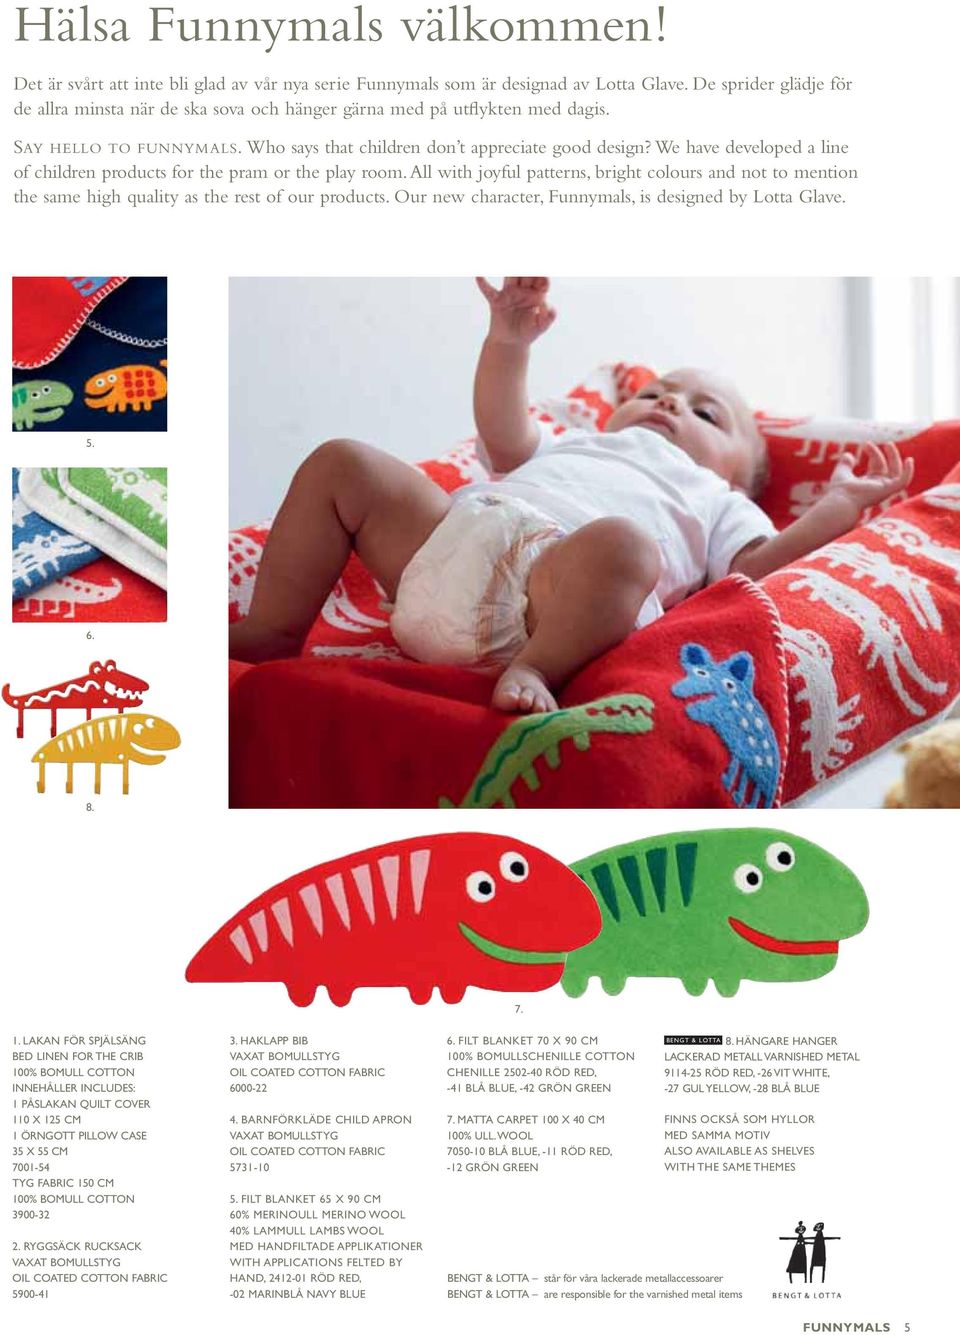 We have developed a line of children products for the pram or the play room. All with joyful patterns, bright colours and not to mention the same high quality as the rest of our products.